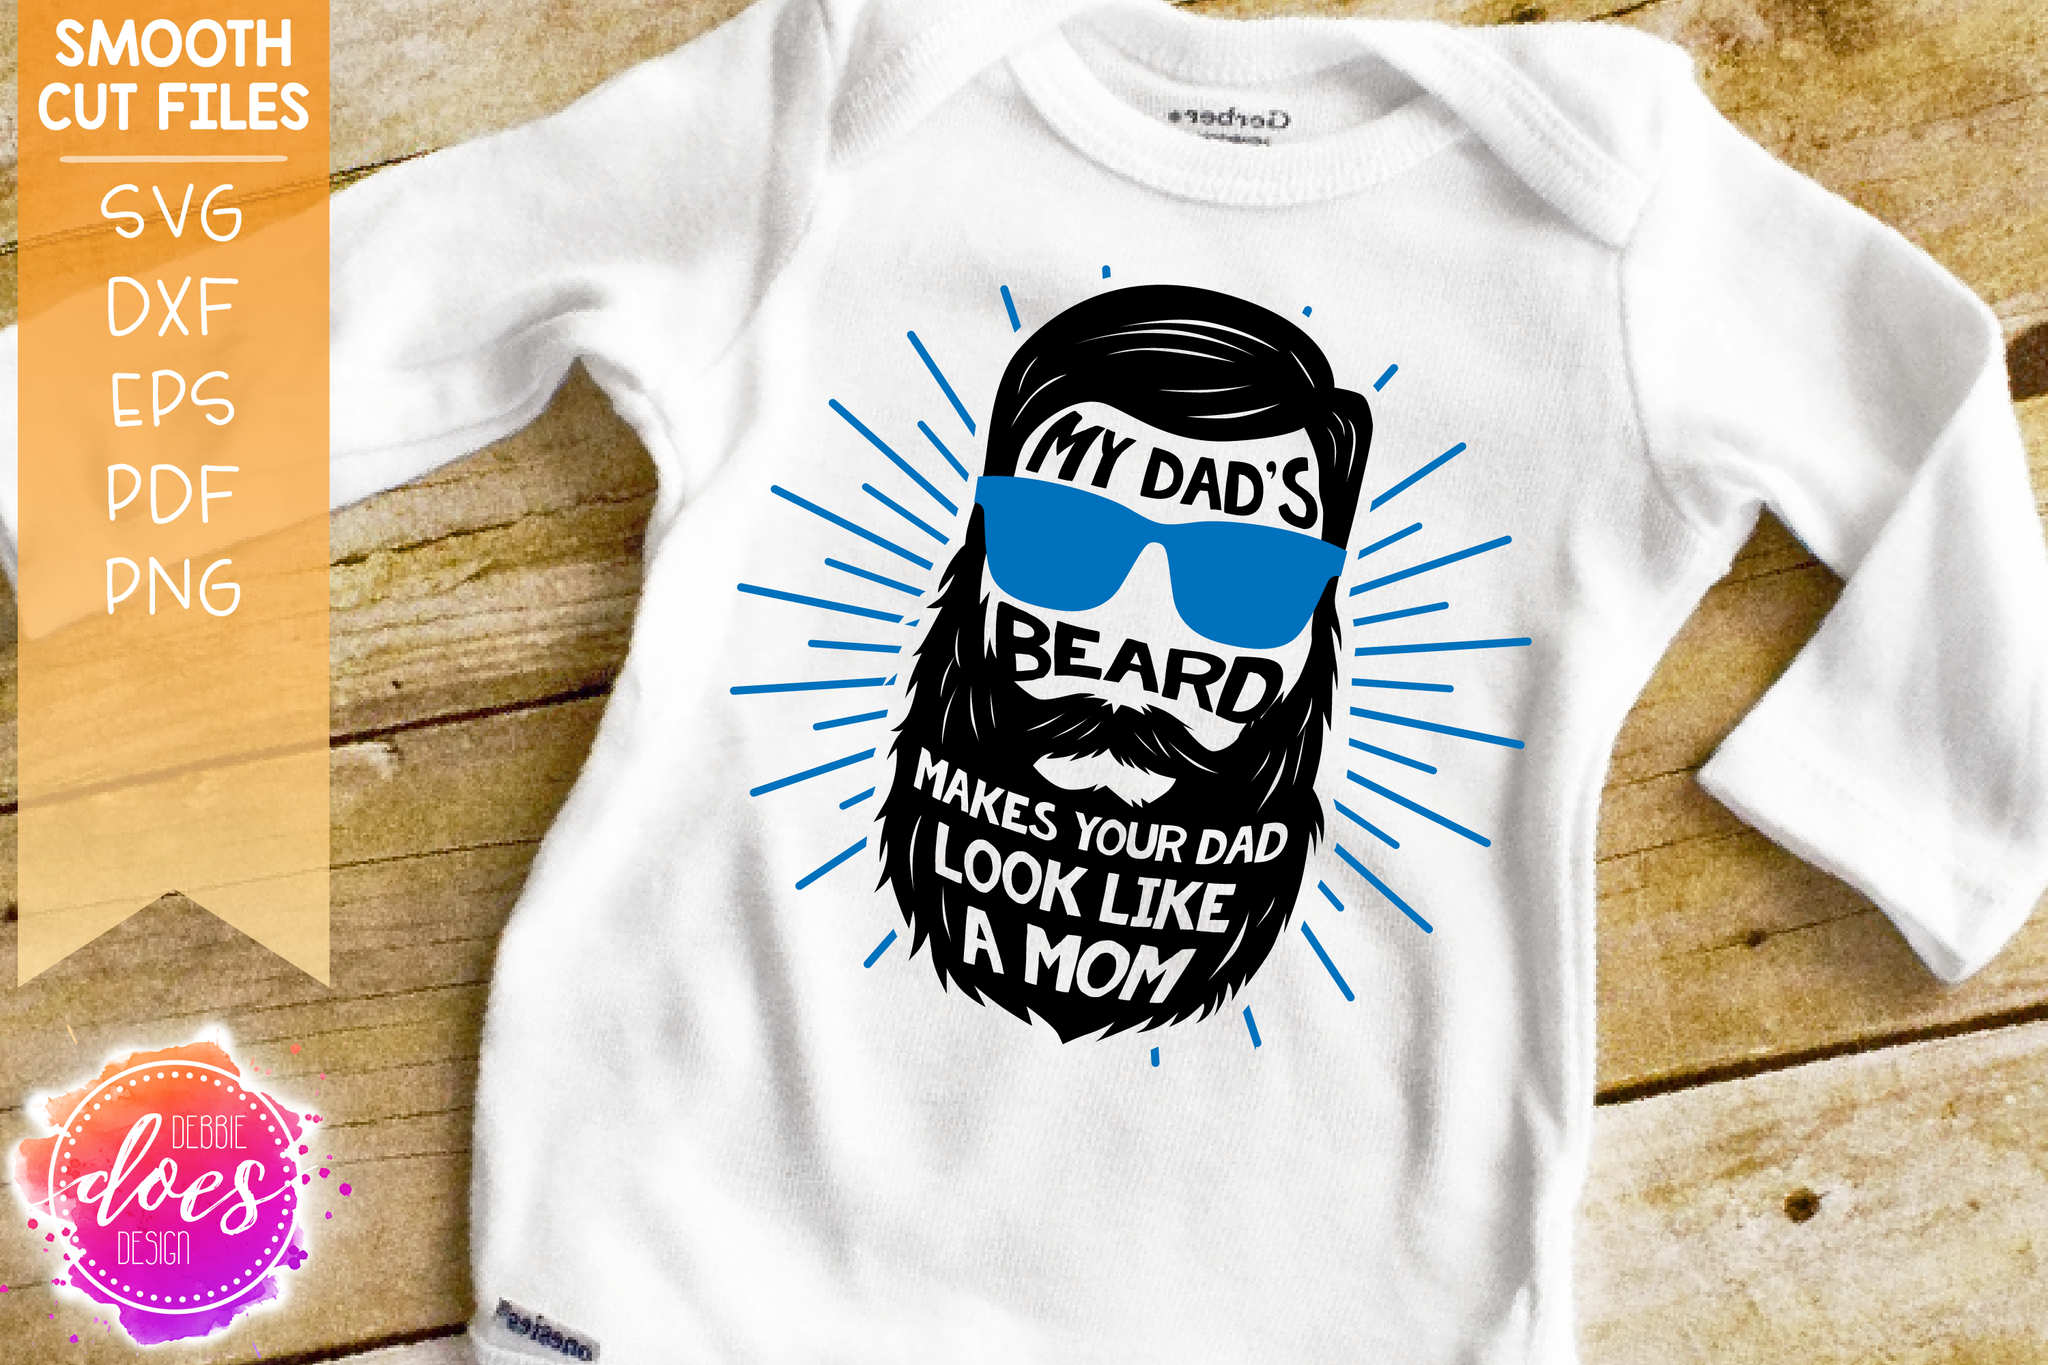 Download My Dad's Beard Makes Your Dad Look Like a Mom - SVG File ...